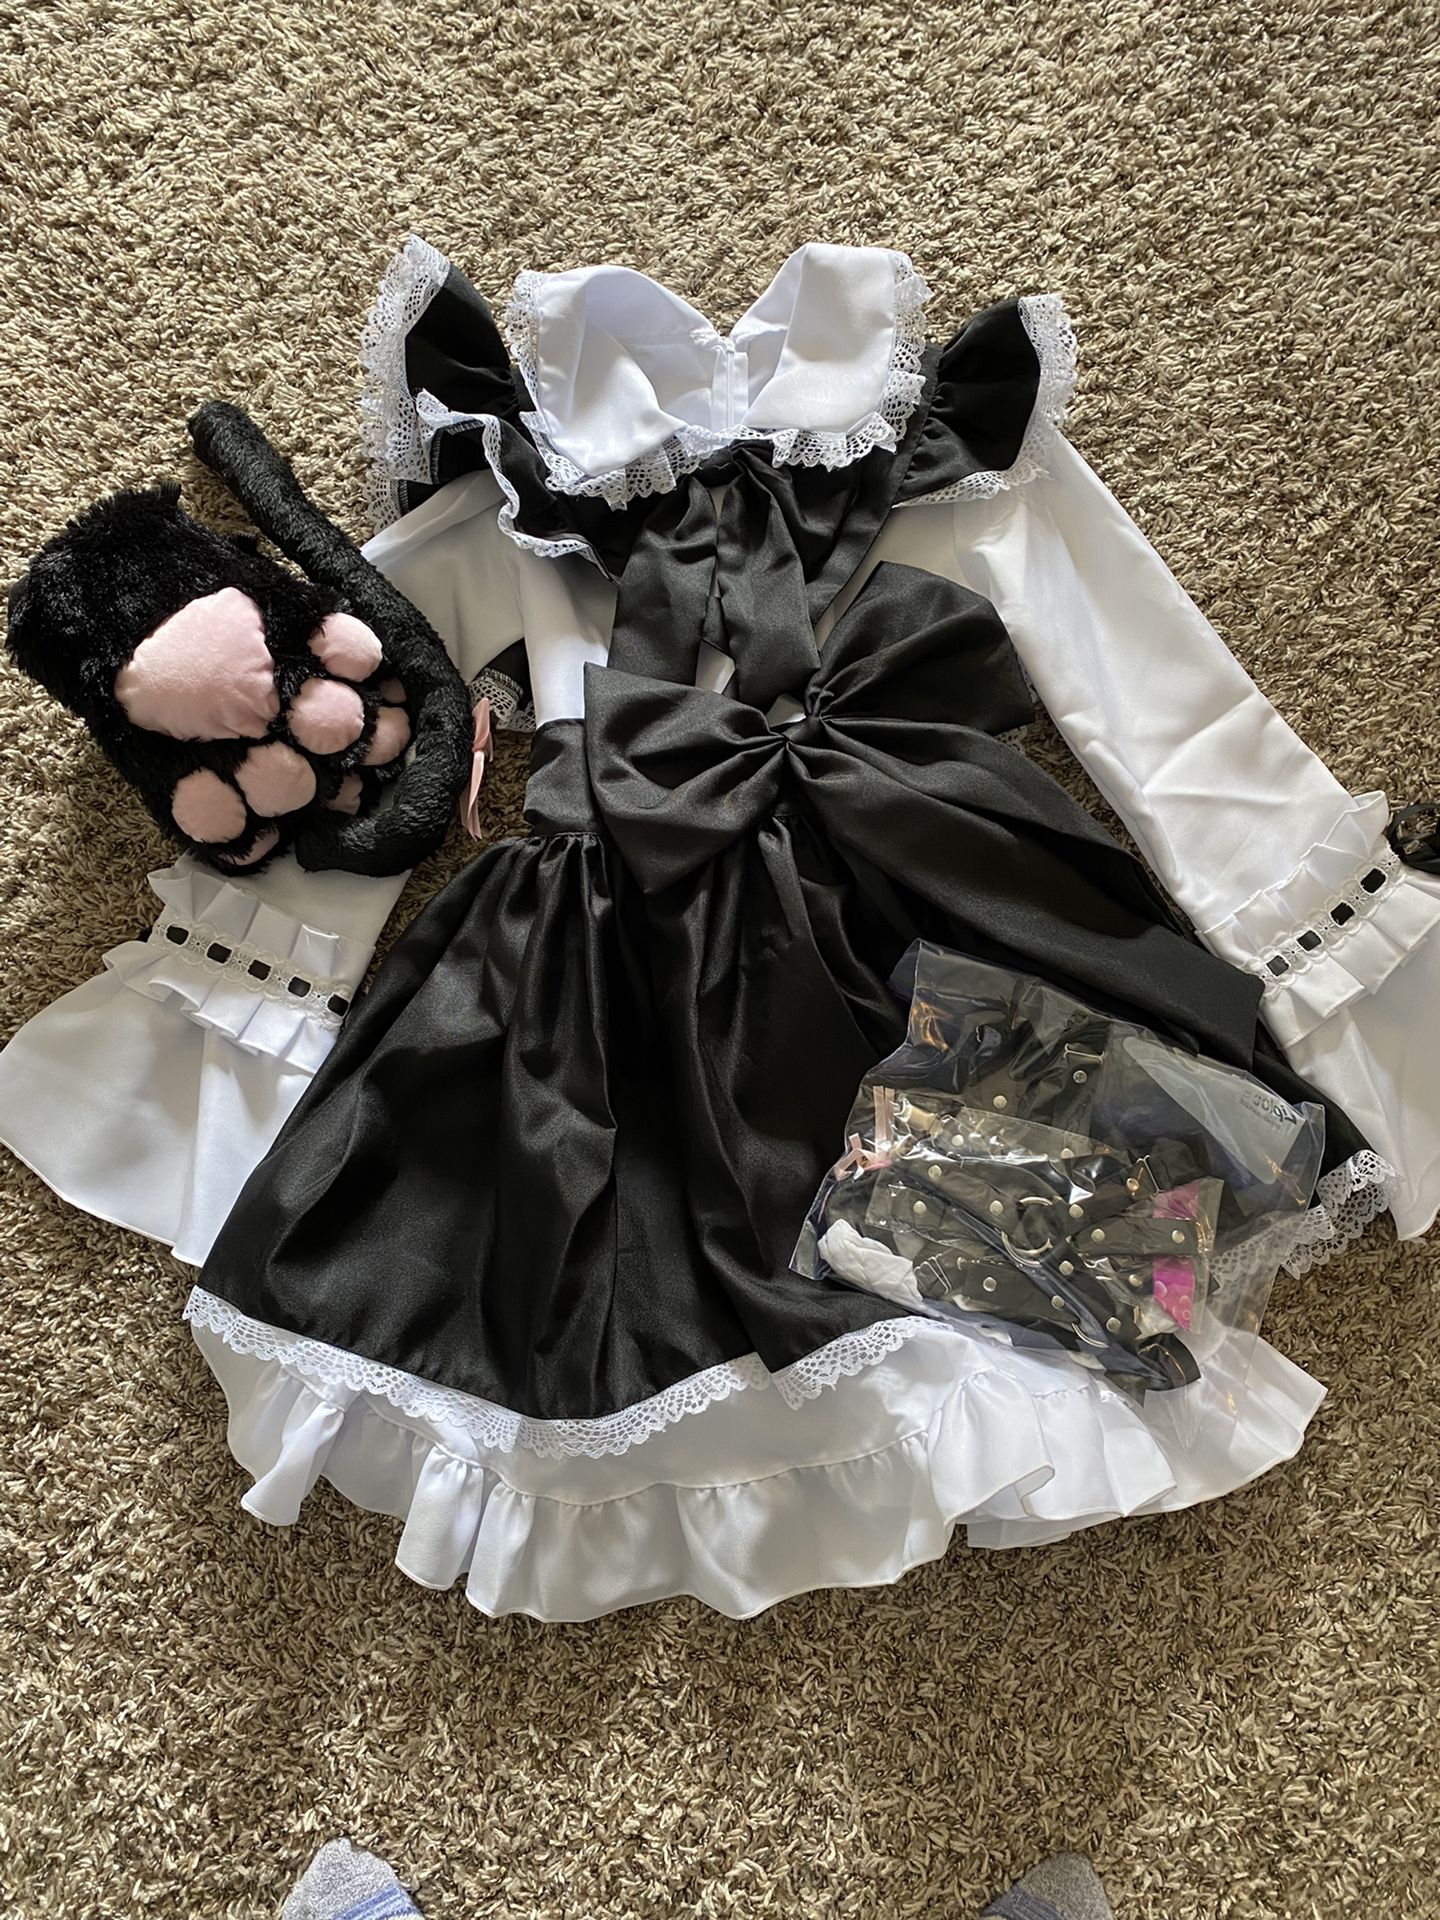 Black & White Anime Dress Maid Style Outfit 28” Waist With Paws, Garter, Ears, And Stockings